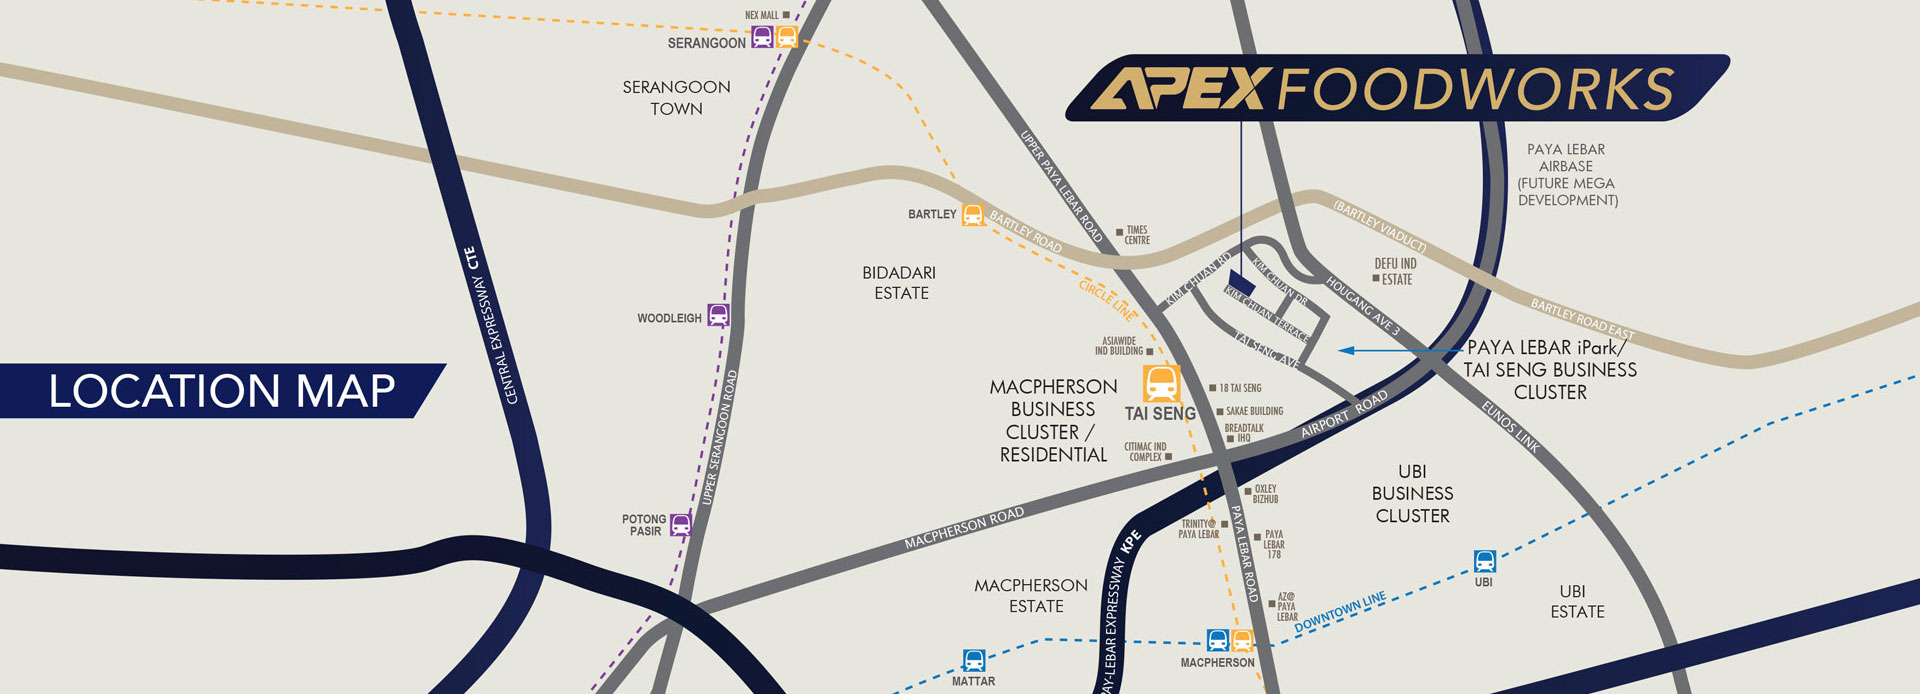 Apex Foodworks Food Factory 's location map